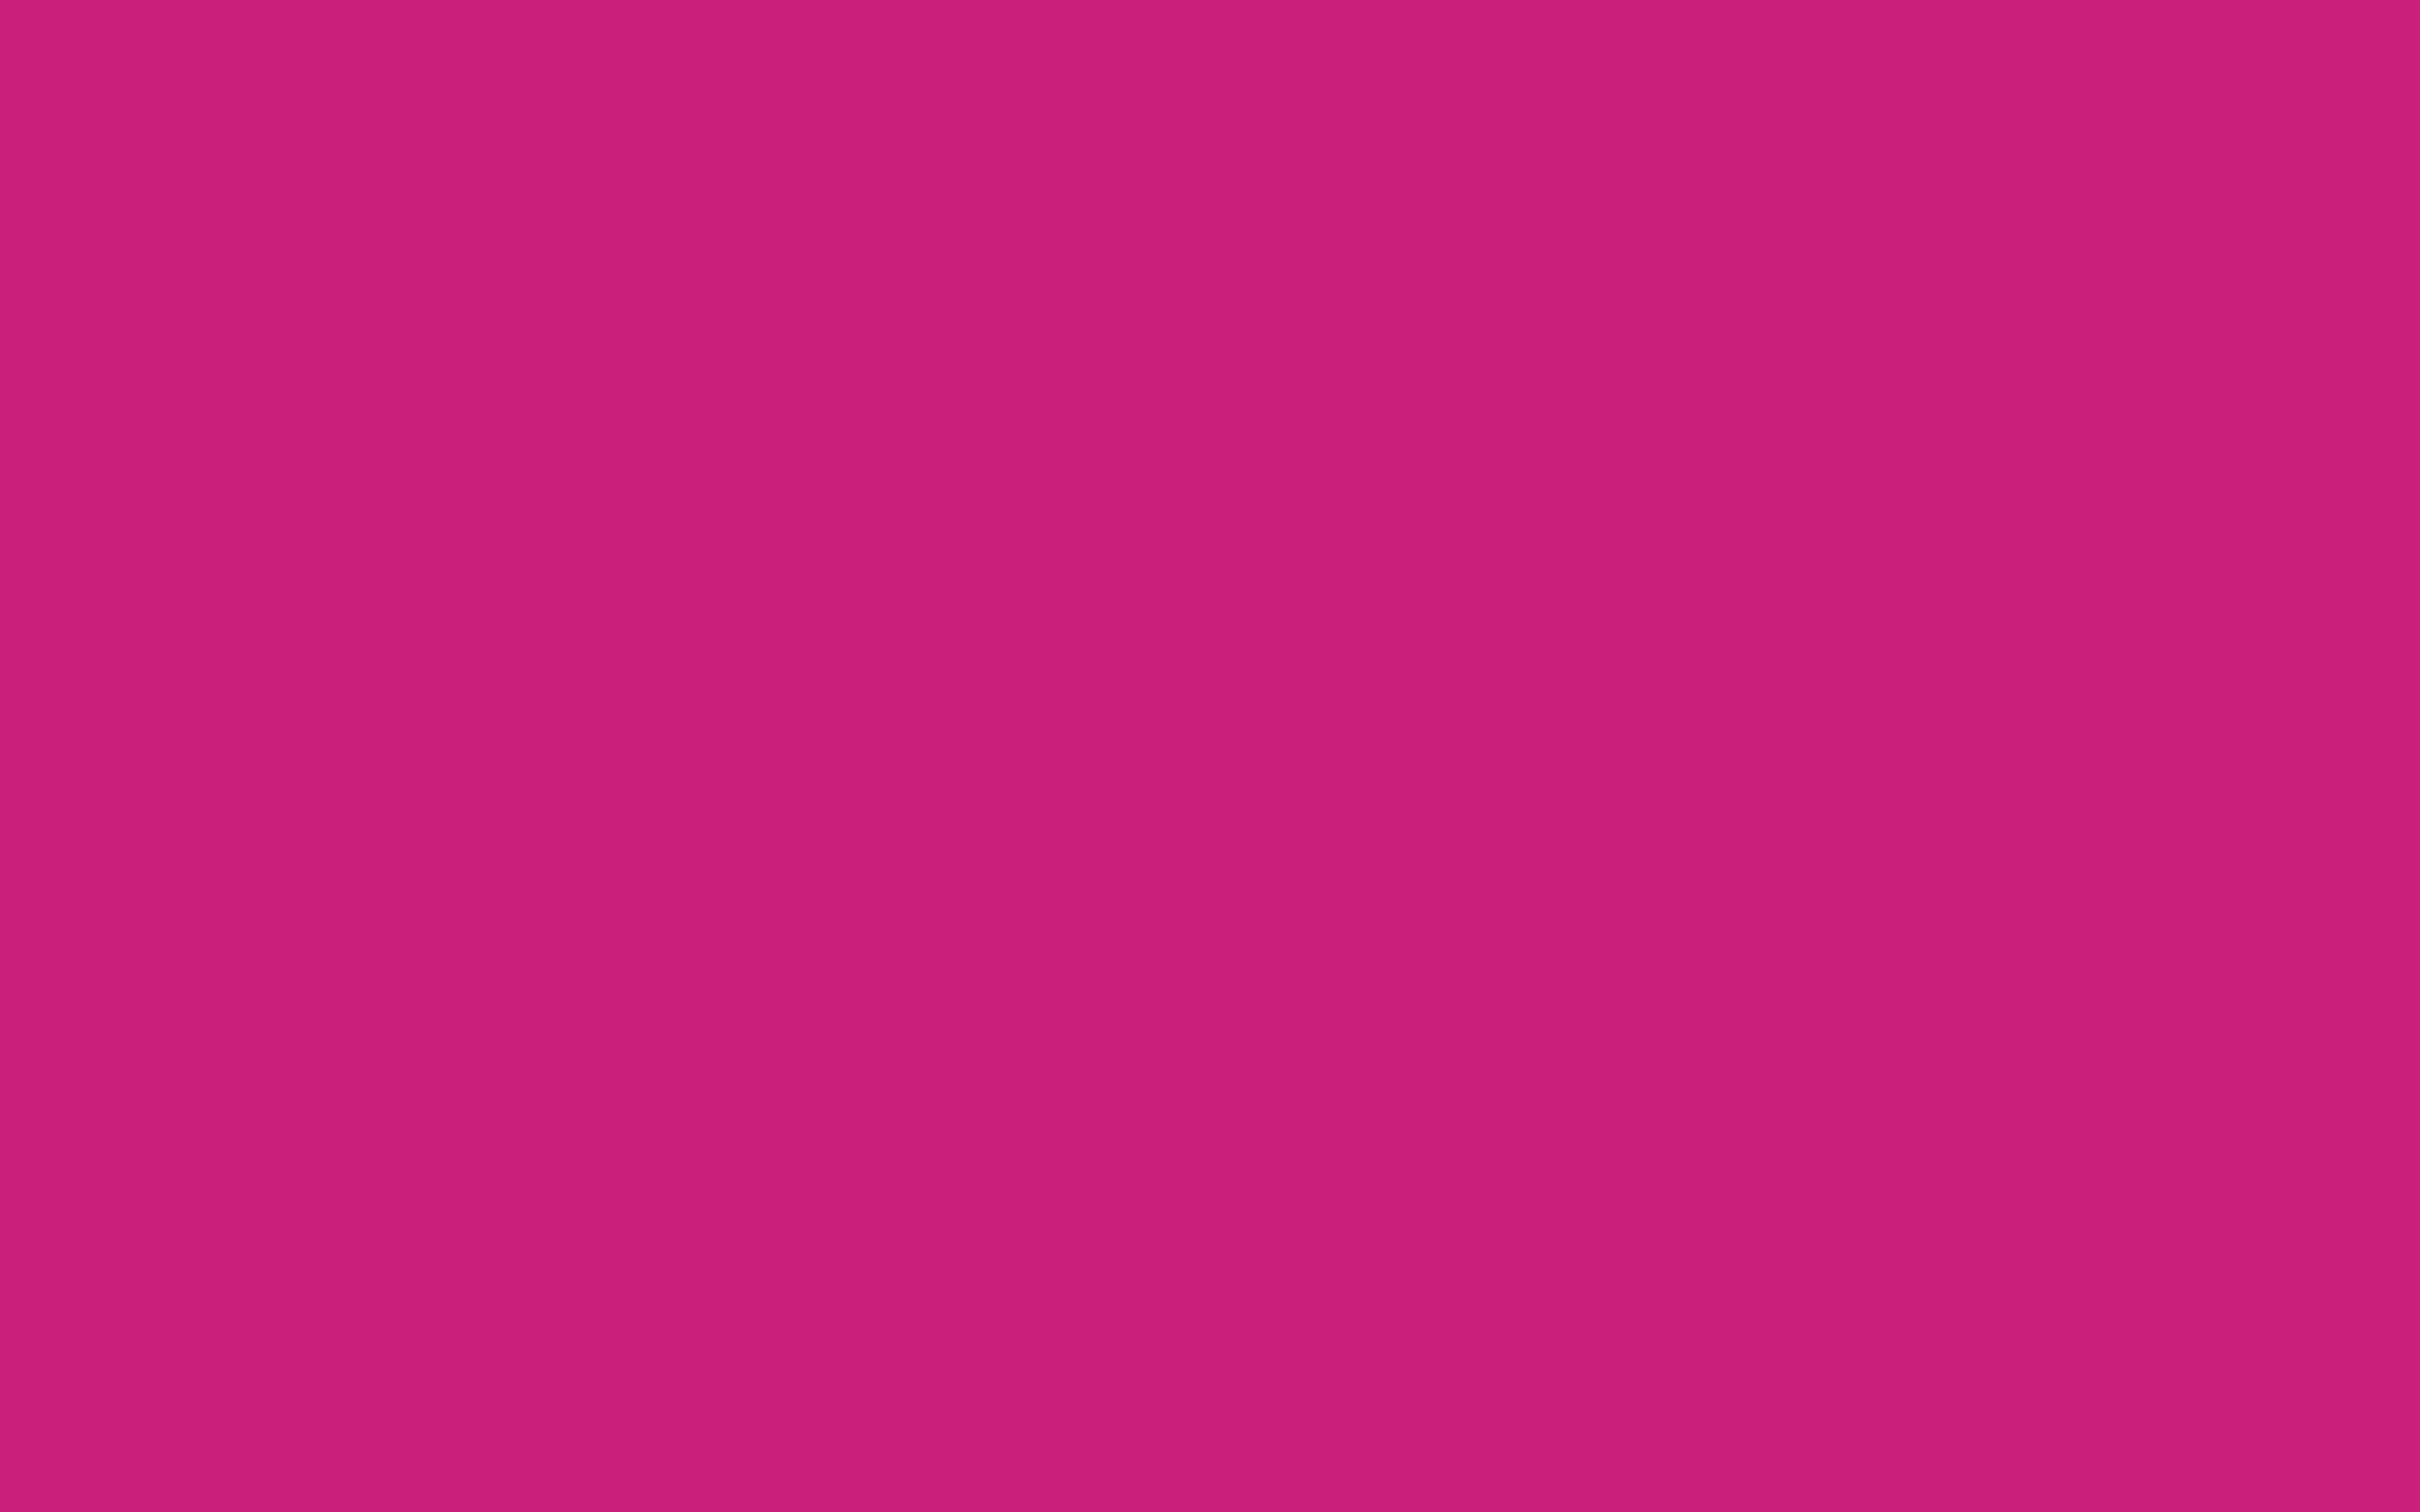 Download Solid Magenta Background 8073 2880x1800 px High ...